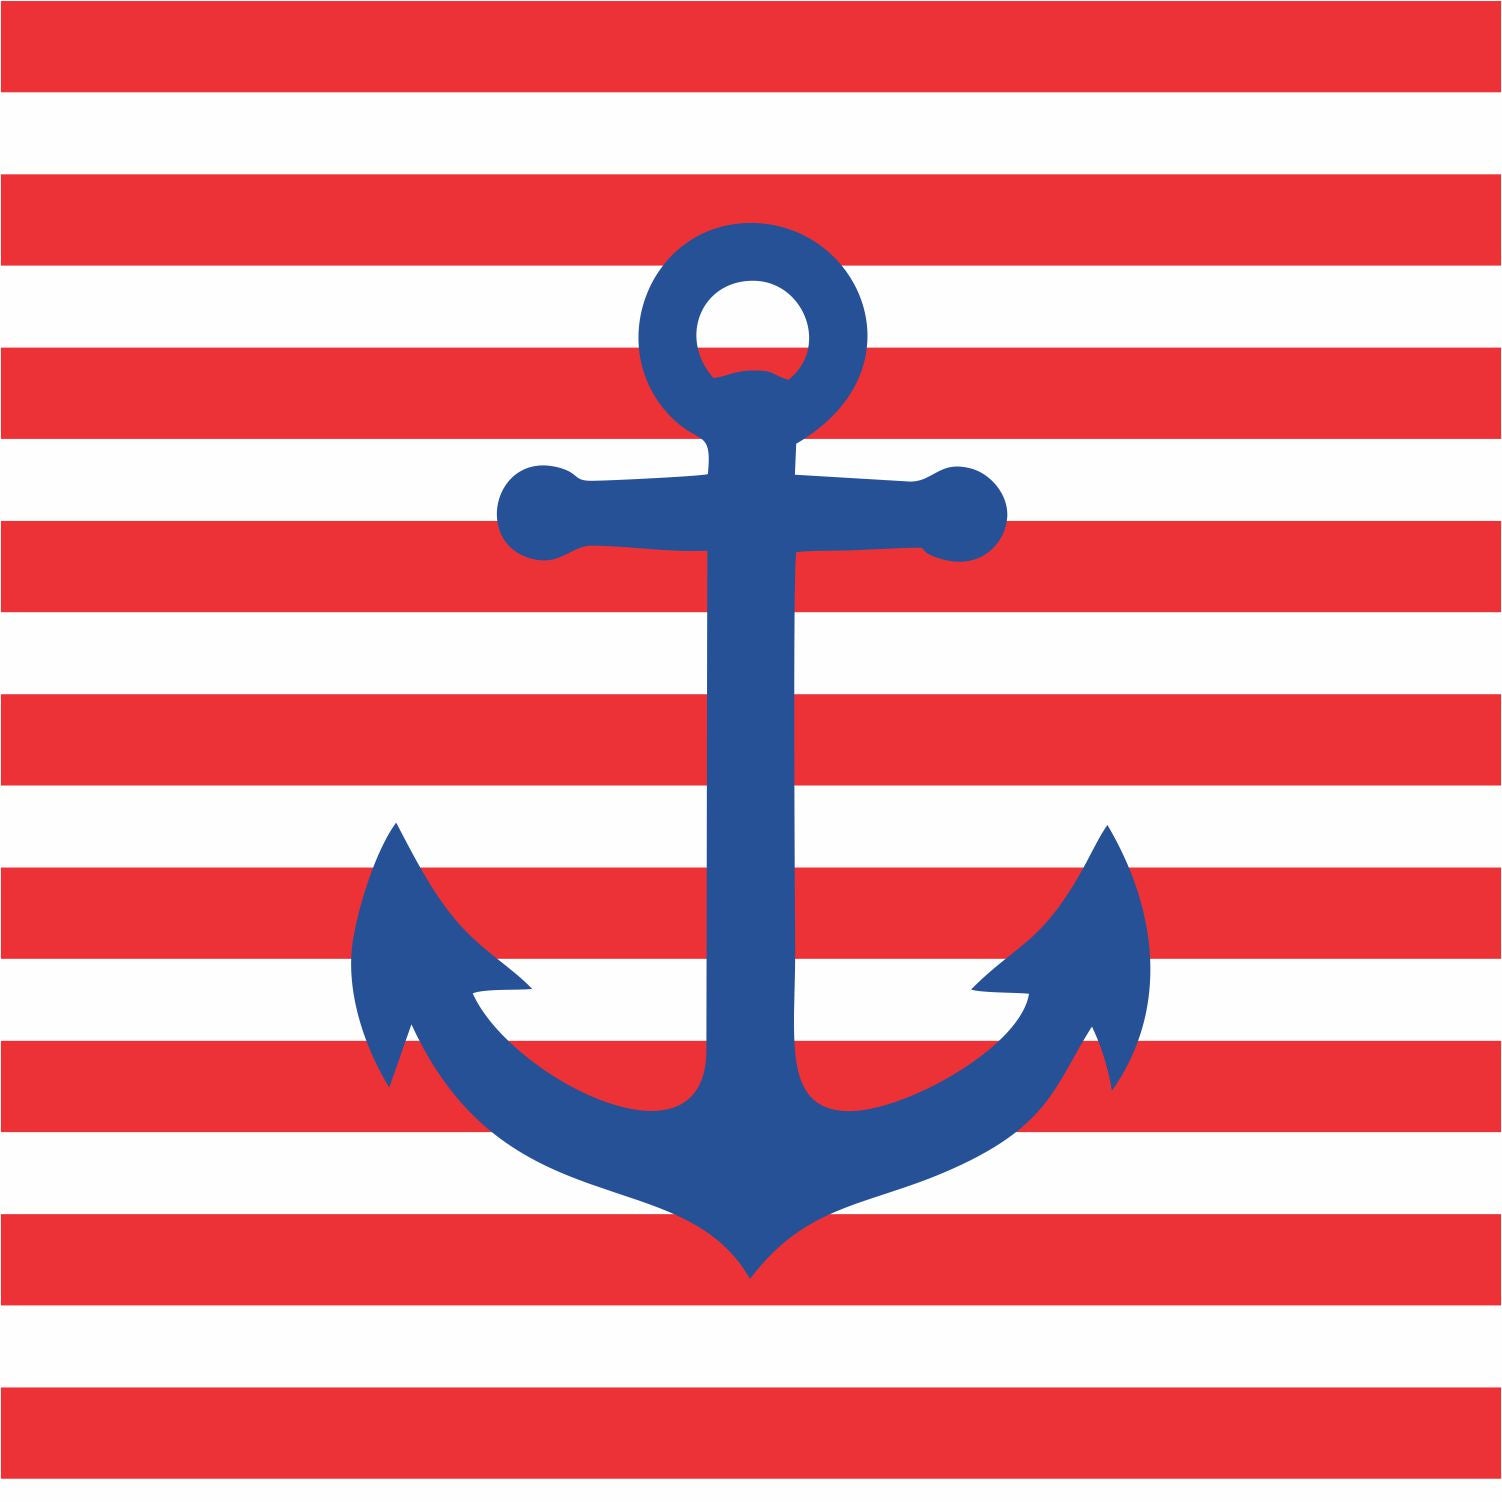 Placemats, Set of  12 Square 11 x 11 nautical, Red white and Blue